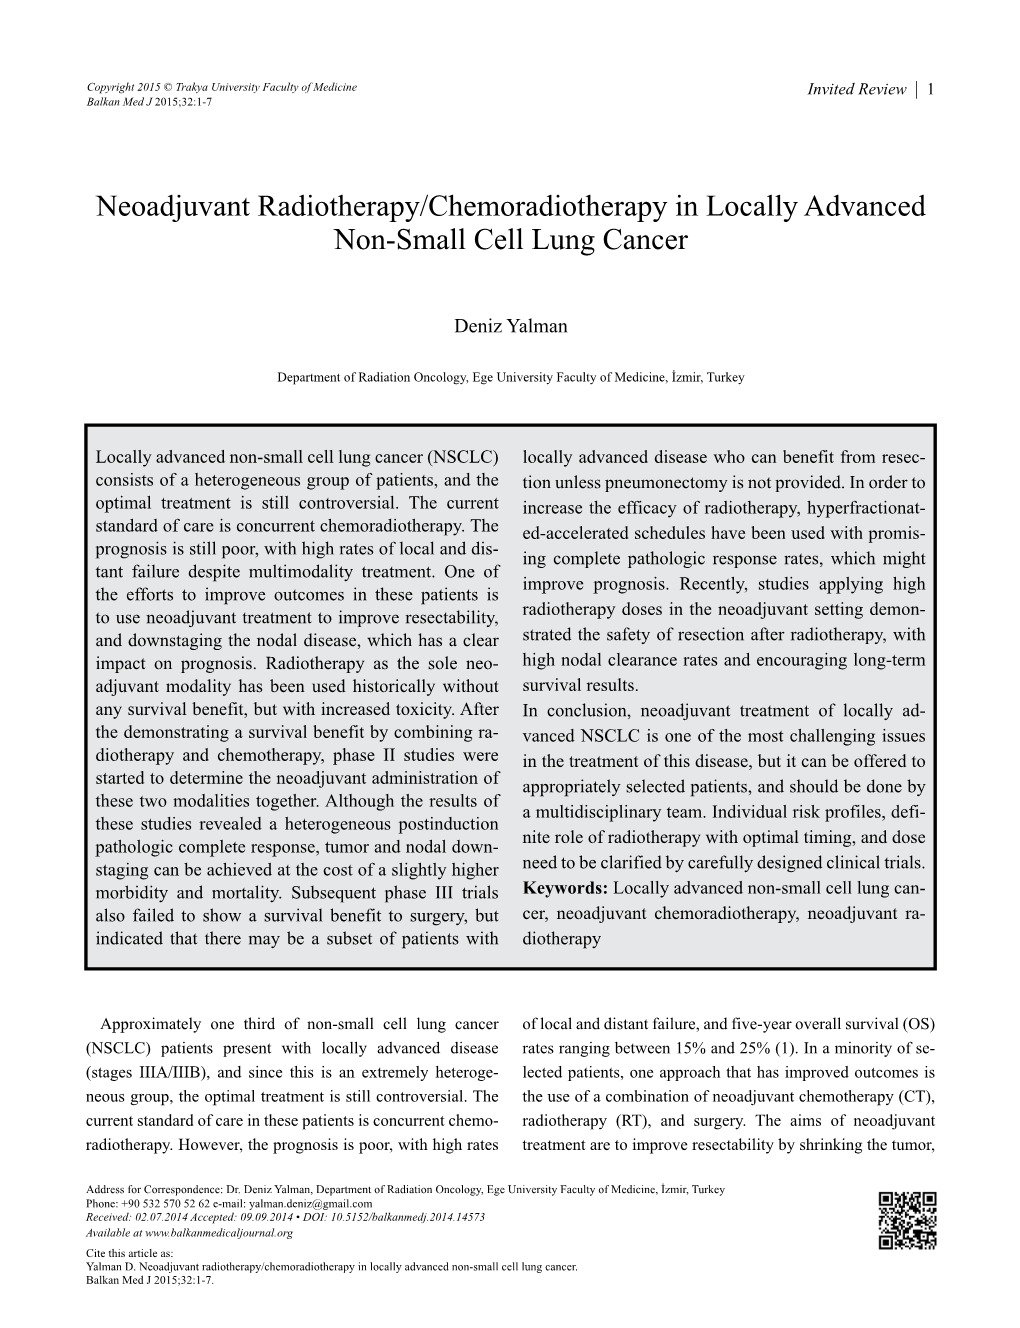 Neoadjuvant Radiotherapy/Chemoradiotherapy in Locally Advanced Non-Small Cell Lung Cancer